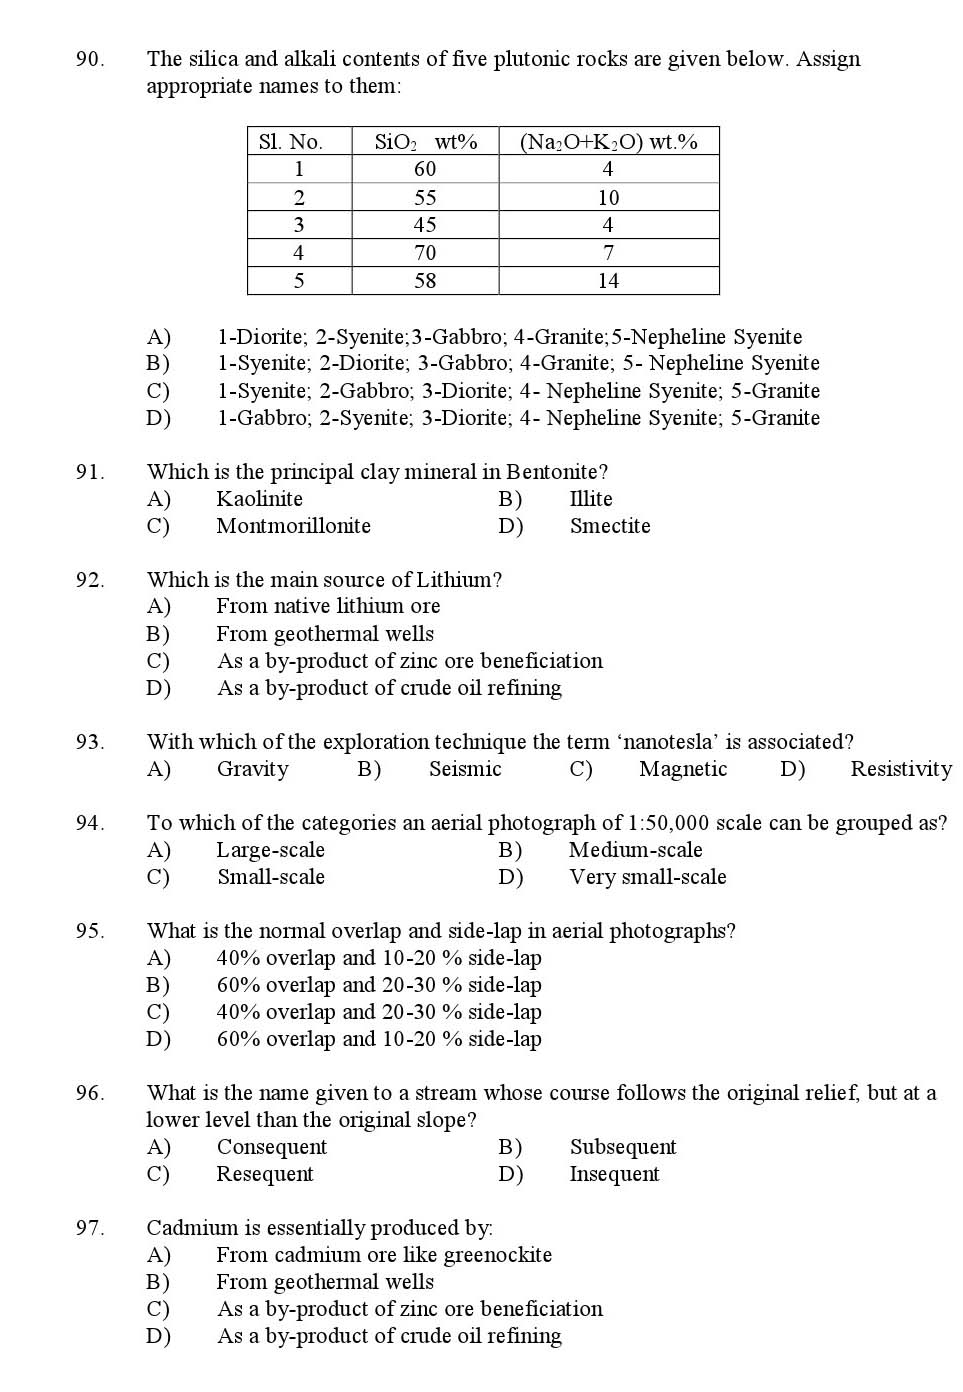 Kerala SET Geography Exam 2016 Question Code 16611 A 10